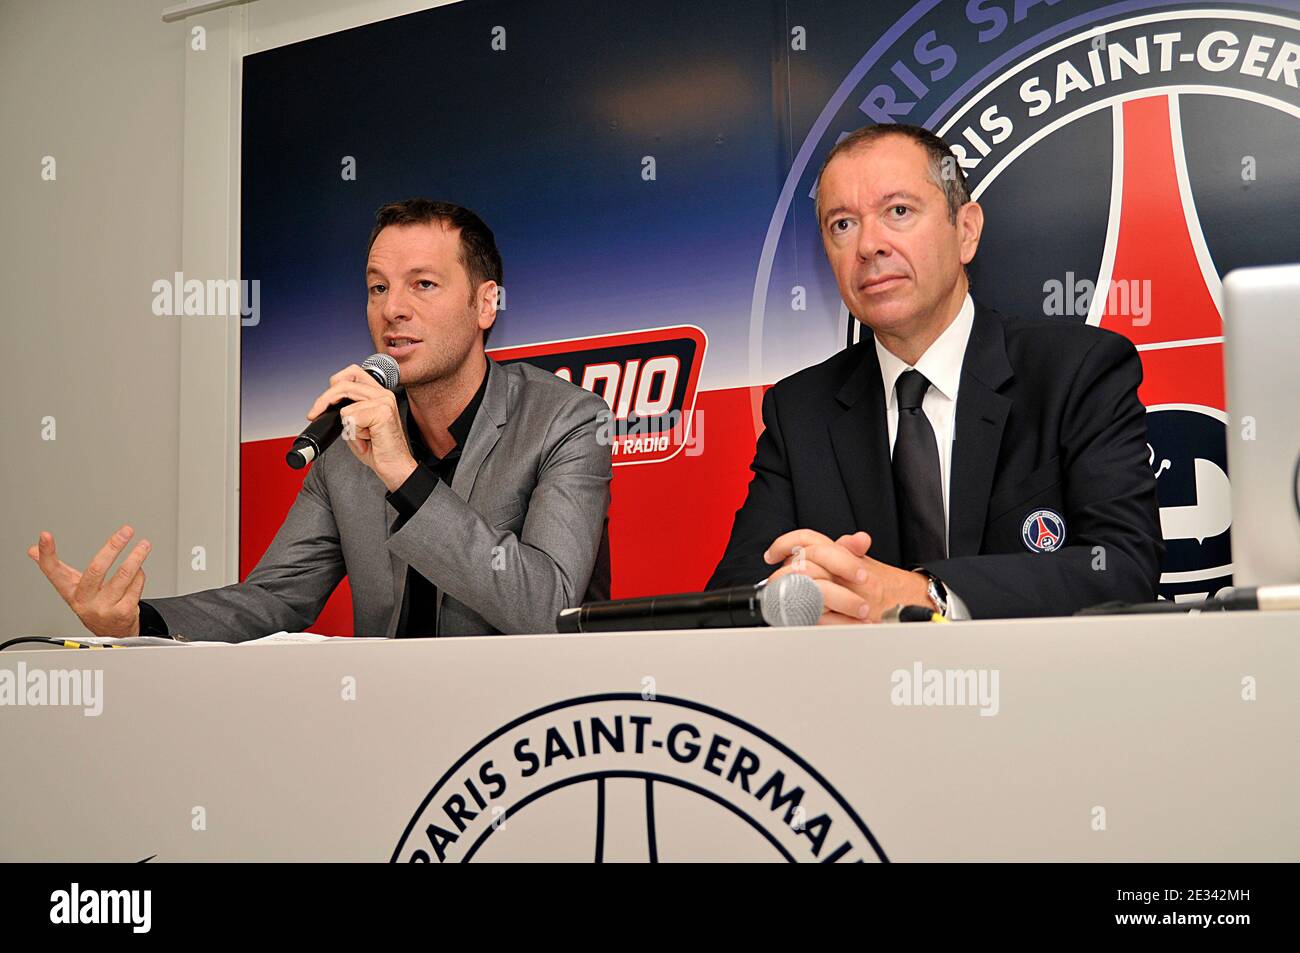 Paris Saint-Germain (PSG) football team president Robin Leproux and Goom Radio chairman Roberto Ciurleo attend the launch of PSG radio to 'le Camp des Loges' in Saint-Germain-en-Laye near Paris, France on Wednesday September 22, 2010. Photo by Thierry Plessis/ABACAPRESS.COM Stock Photo